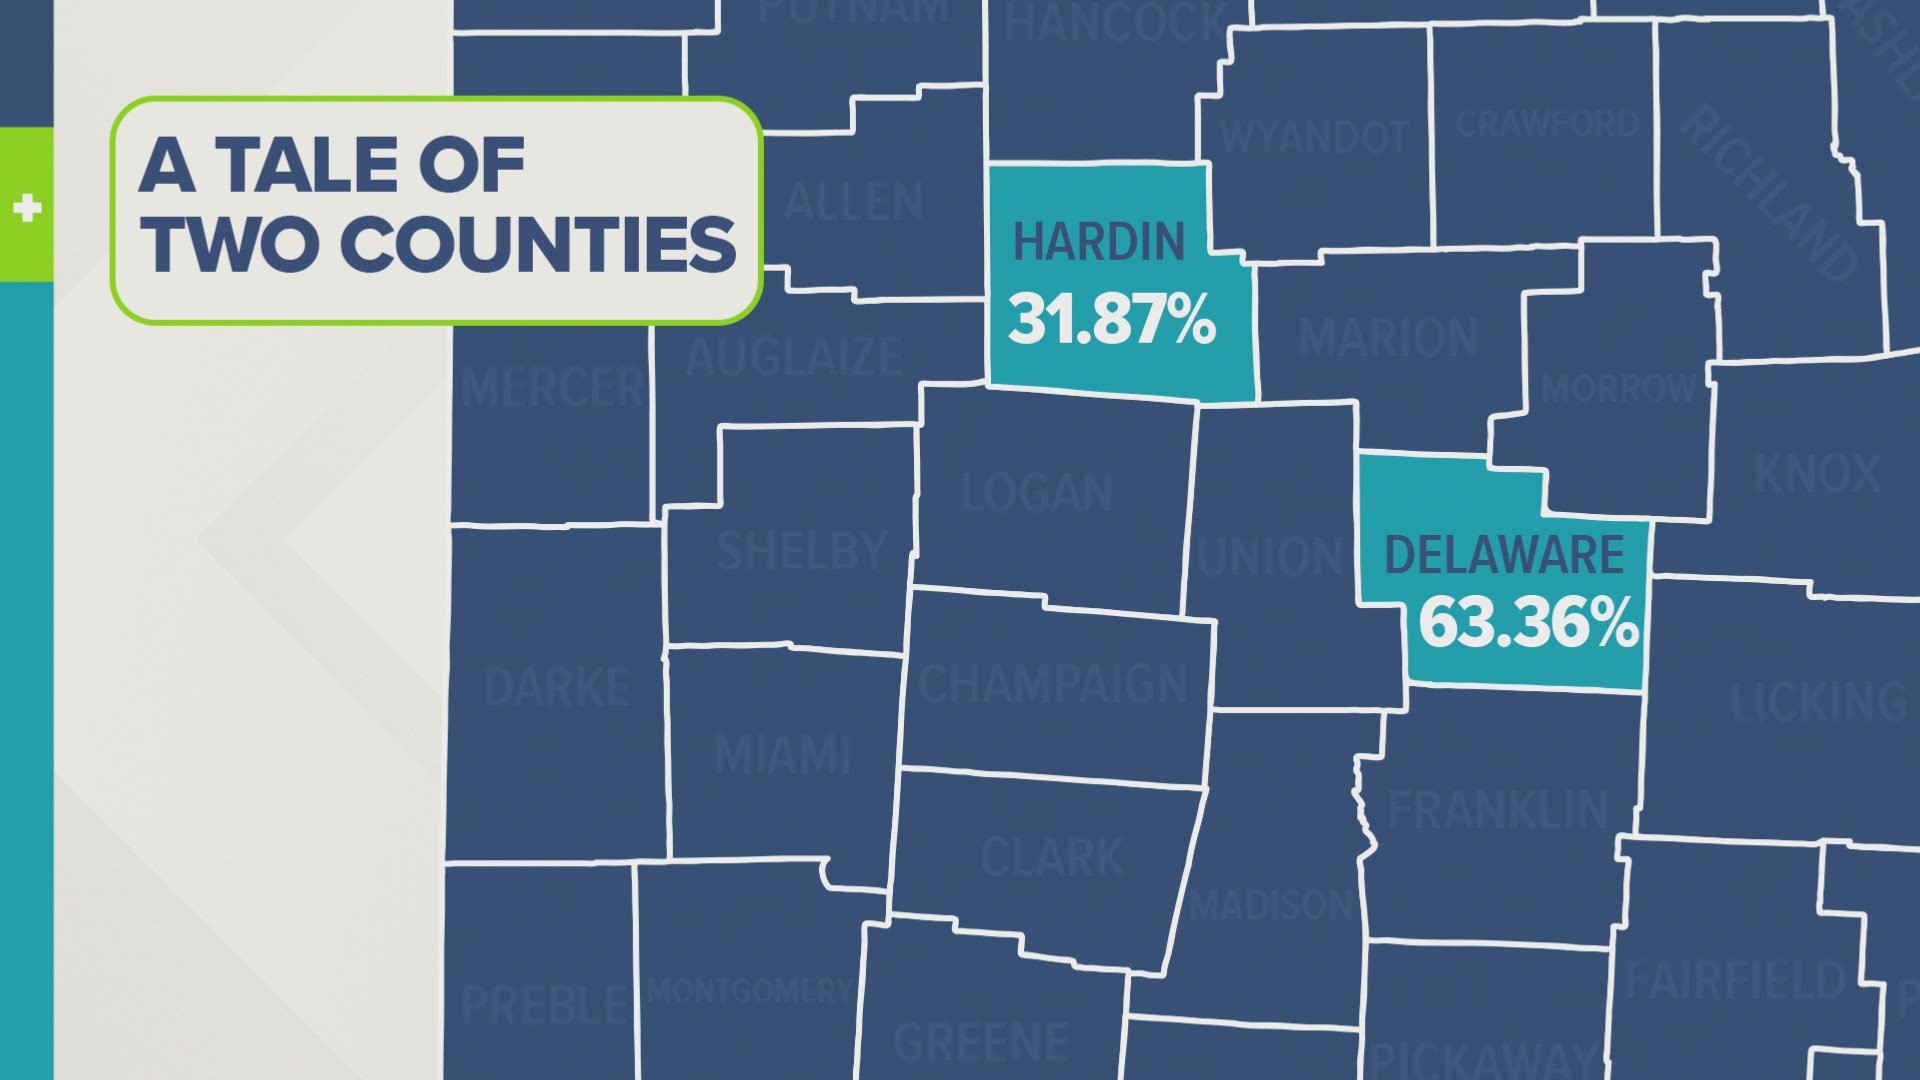 10TV went to Delaware County, which has the highest vaccination rates, and Hardin County, where the vaccination rate is among the lowest in the state.